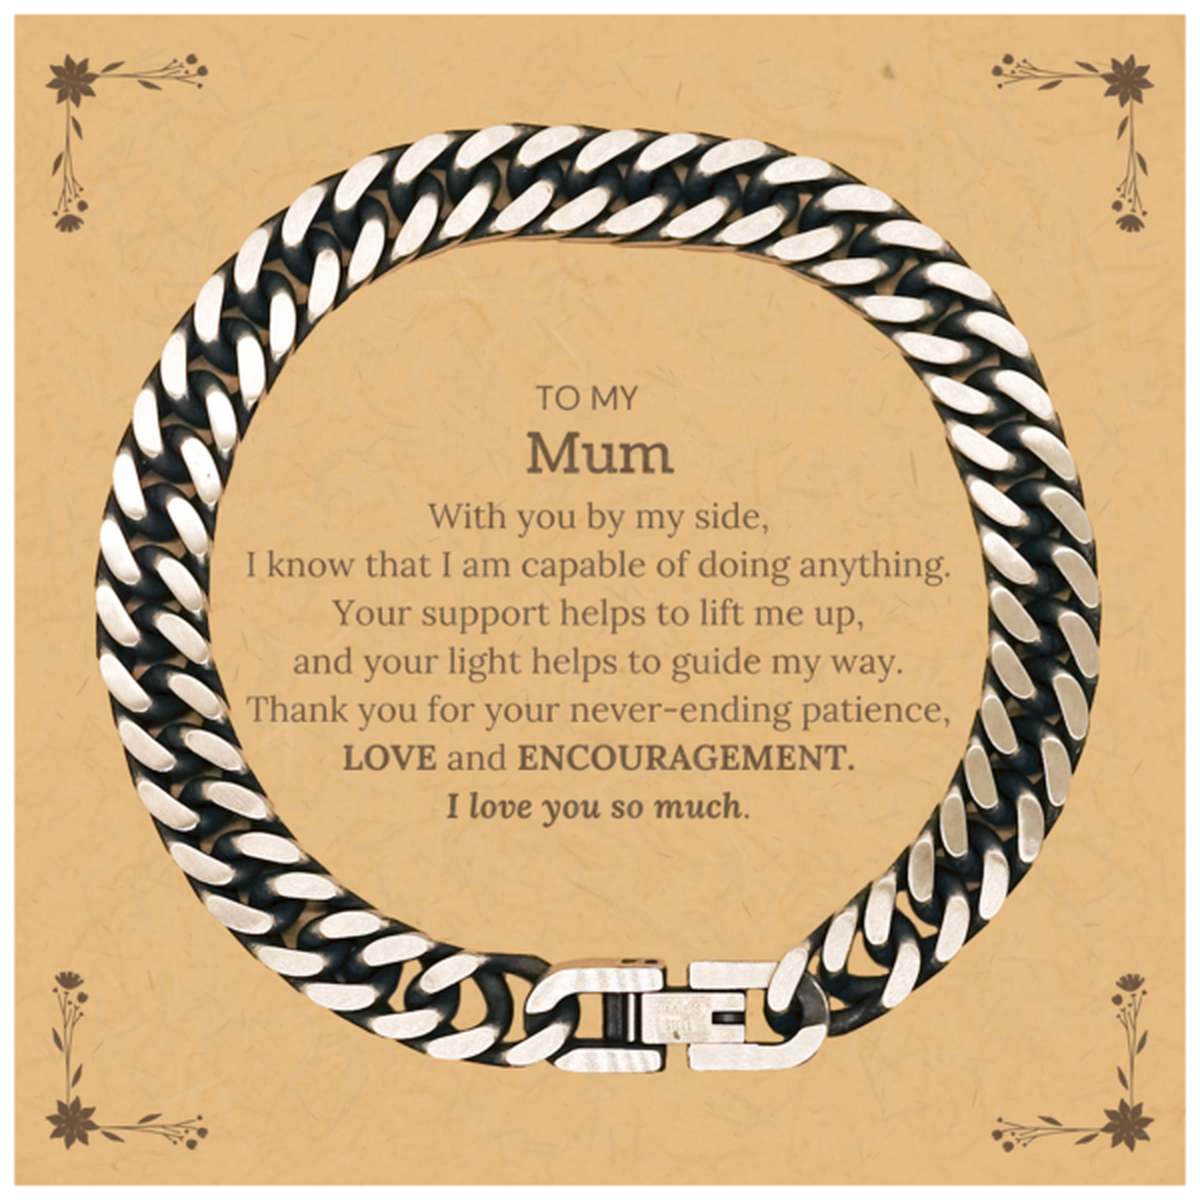 Appreciation Mum Cuban Link Chain Bracelet Gifts, To My Mum Birthday Christmas Wedding Keepsake Gifts for Mum With you by my side, I know that I am capable of doing anything. I love you so much